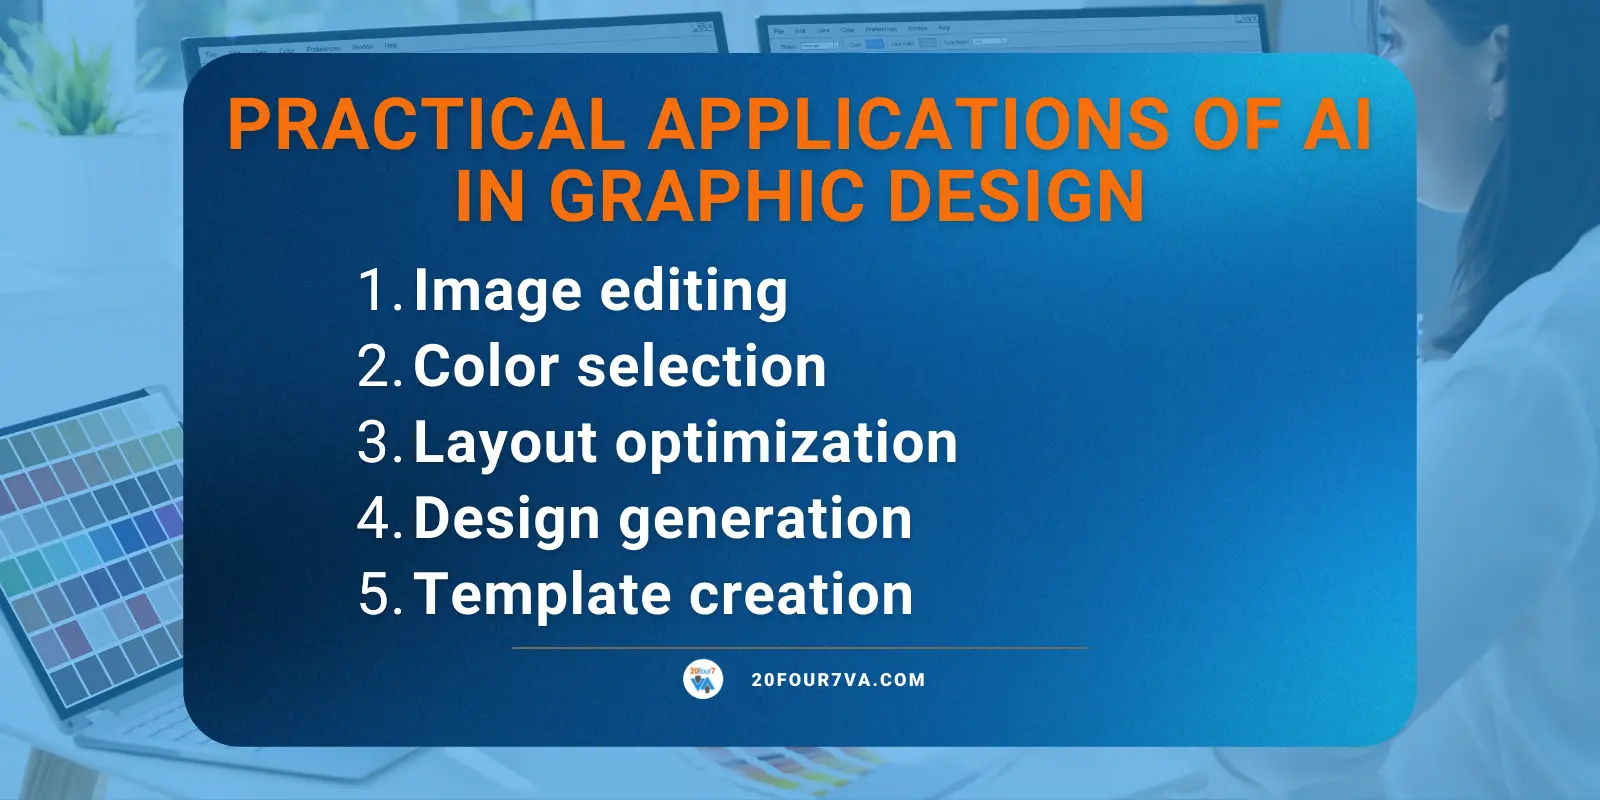 Practical applications of AI in graphics work